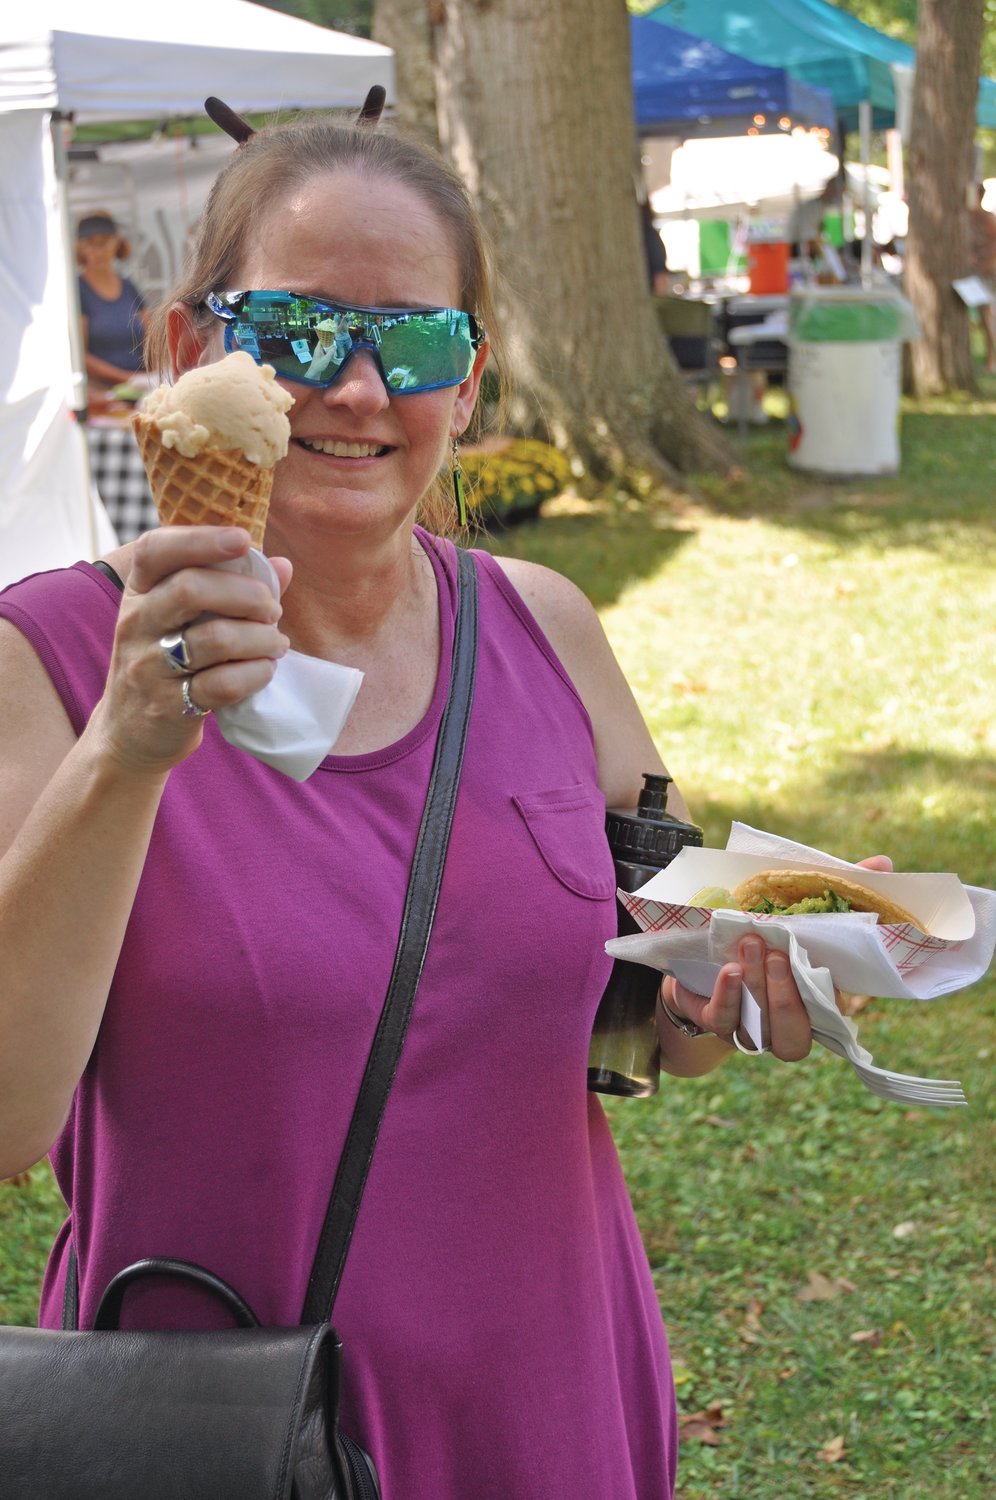 Karen Gunther shows off the food she purchased at the Taste of Montgomery County on the grounds of the Lew Wallace Study & Museum on Saturday.